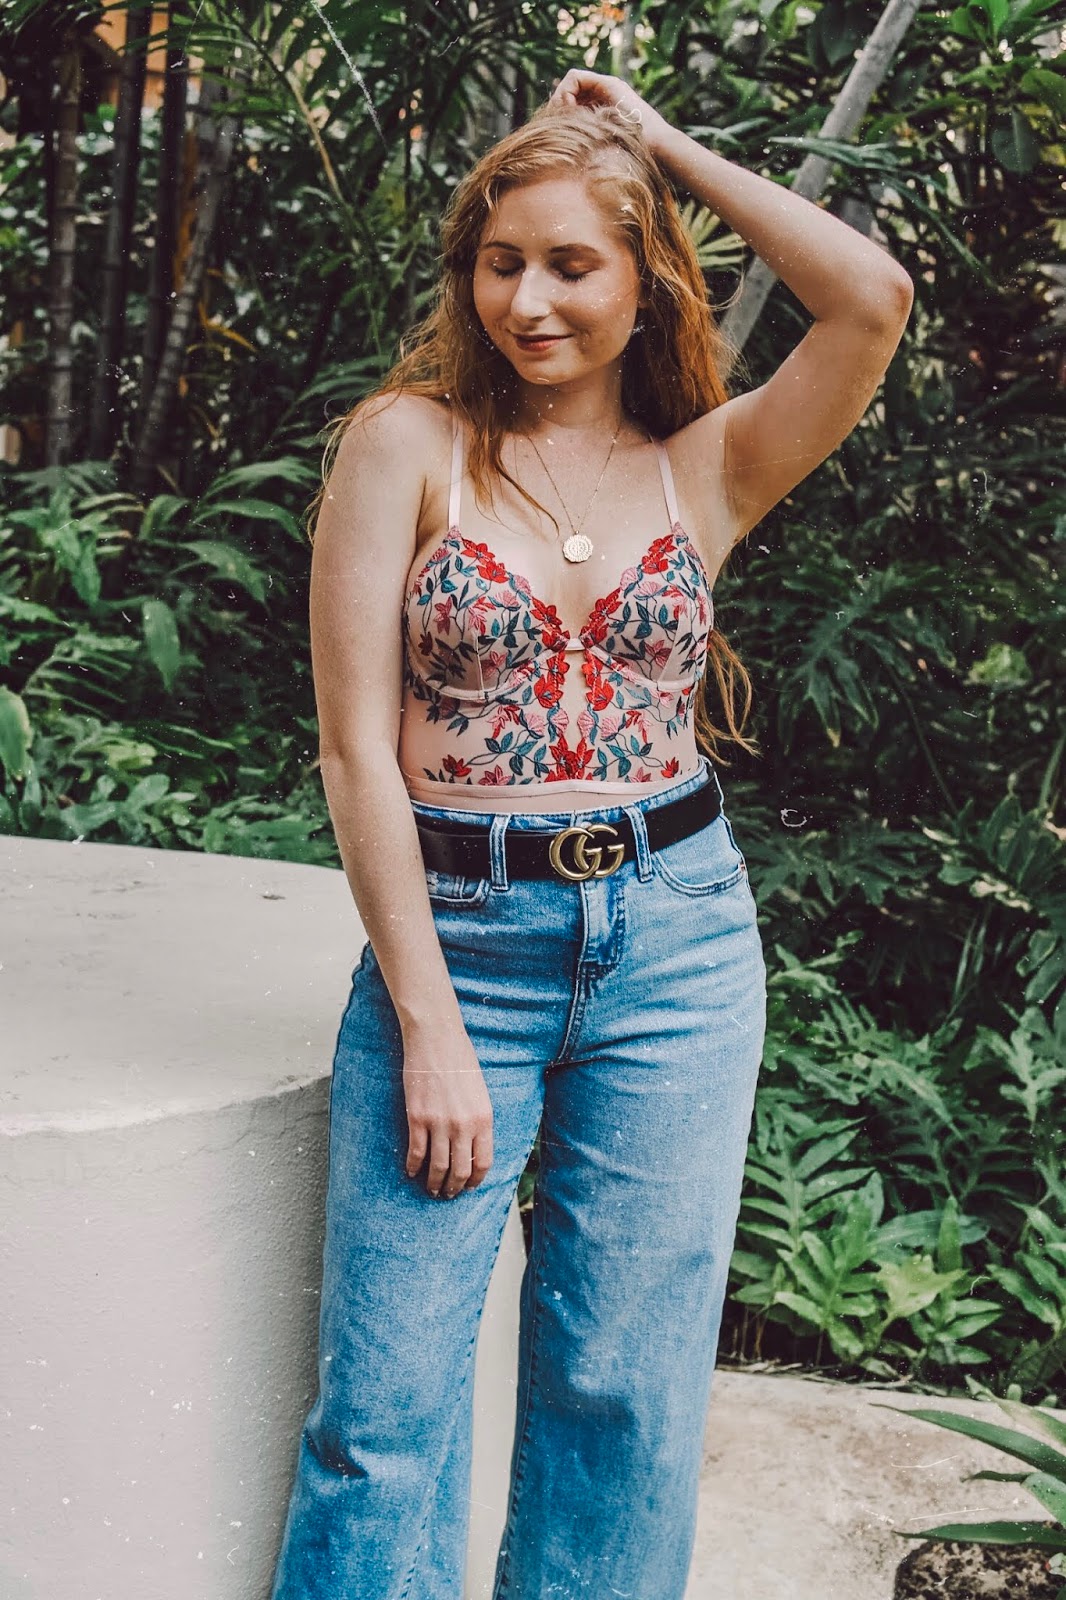 tampa blogger amanda burrows - wearing a floral bodysuit from forever 21 in oahu, hawaii - on a girls' trip for gal getaway by kahlea nicole - wearing a pair of wide-leg denim jeans from target - long hair from barefoot blonde extensions - wearing a gucci belt from amazon.